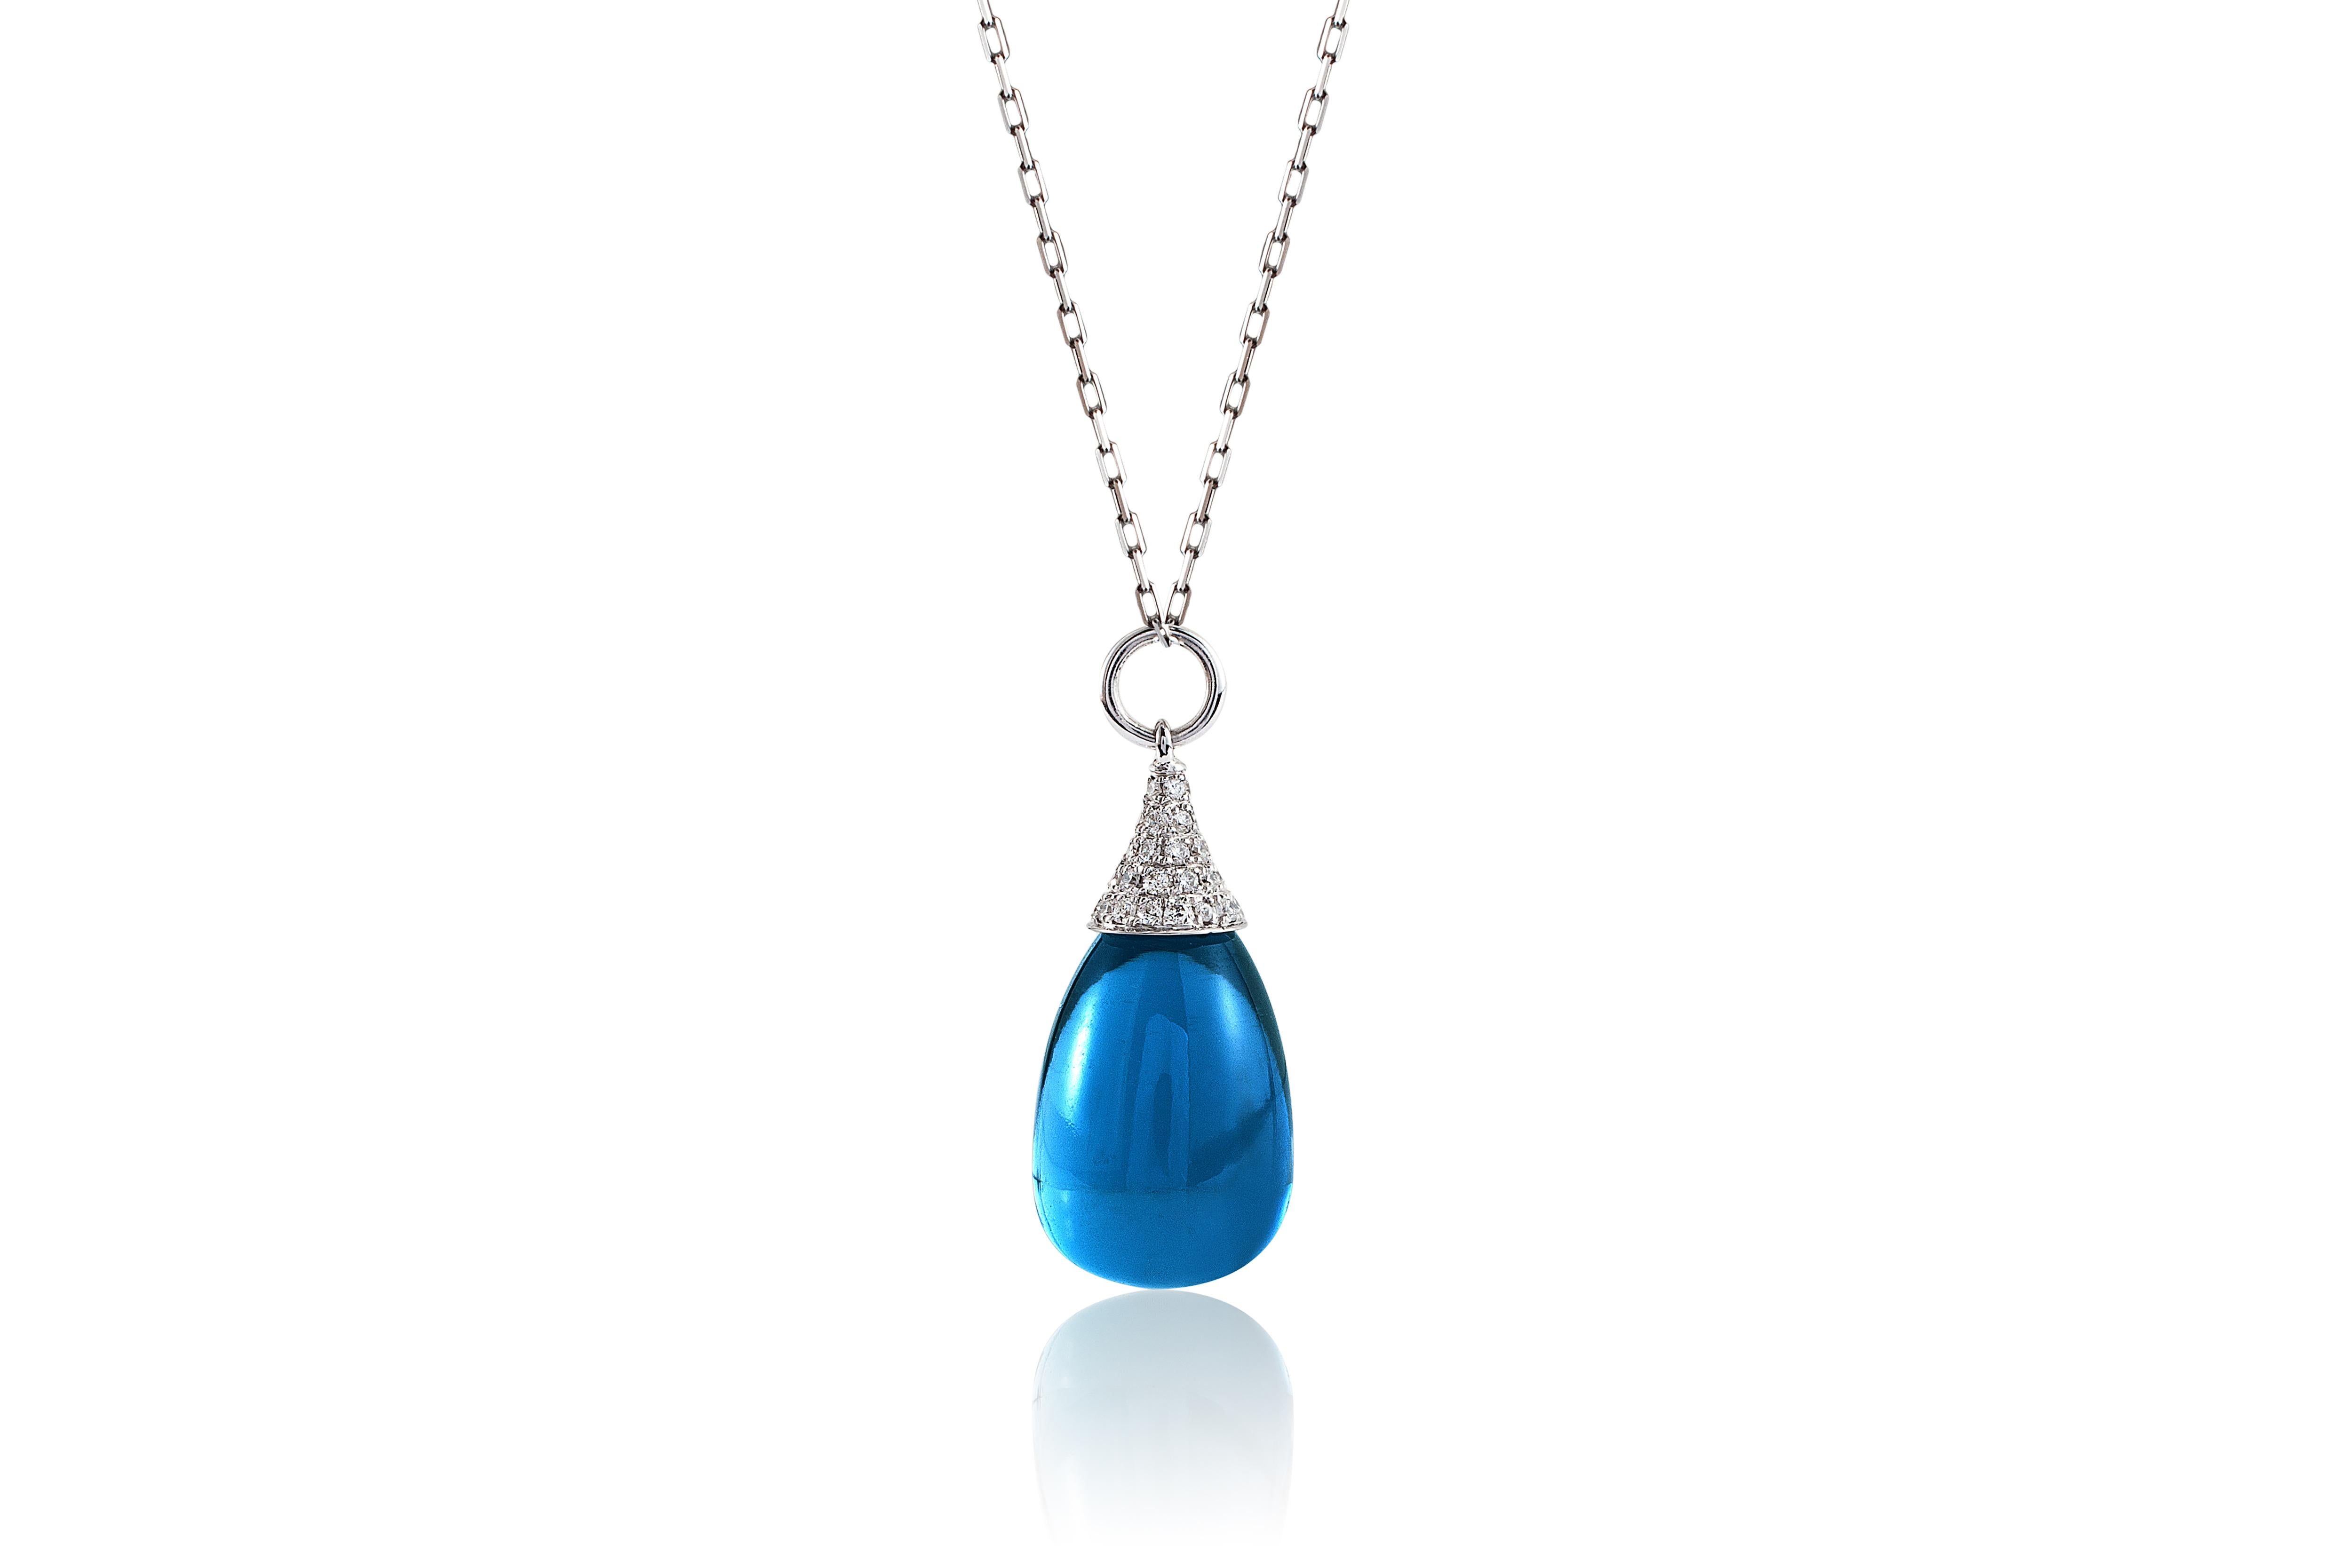 London Blue Topaz Drop Pendant with Diamond Cap in 18K White Gold on an 18'' Chain from 'Naughty' Collection

Stone Size: 19 x 12 mm 

Diamonds: G-H / VS, Approx Wt: 0.32 Cts